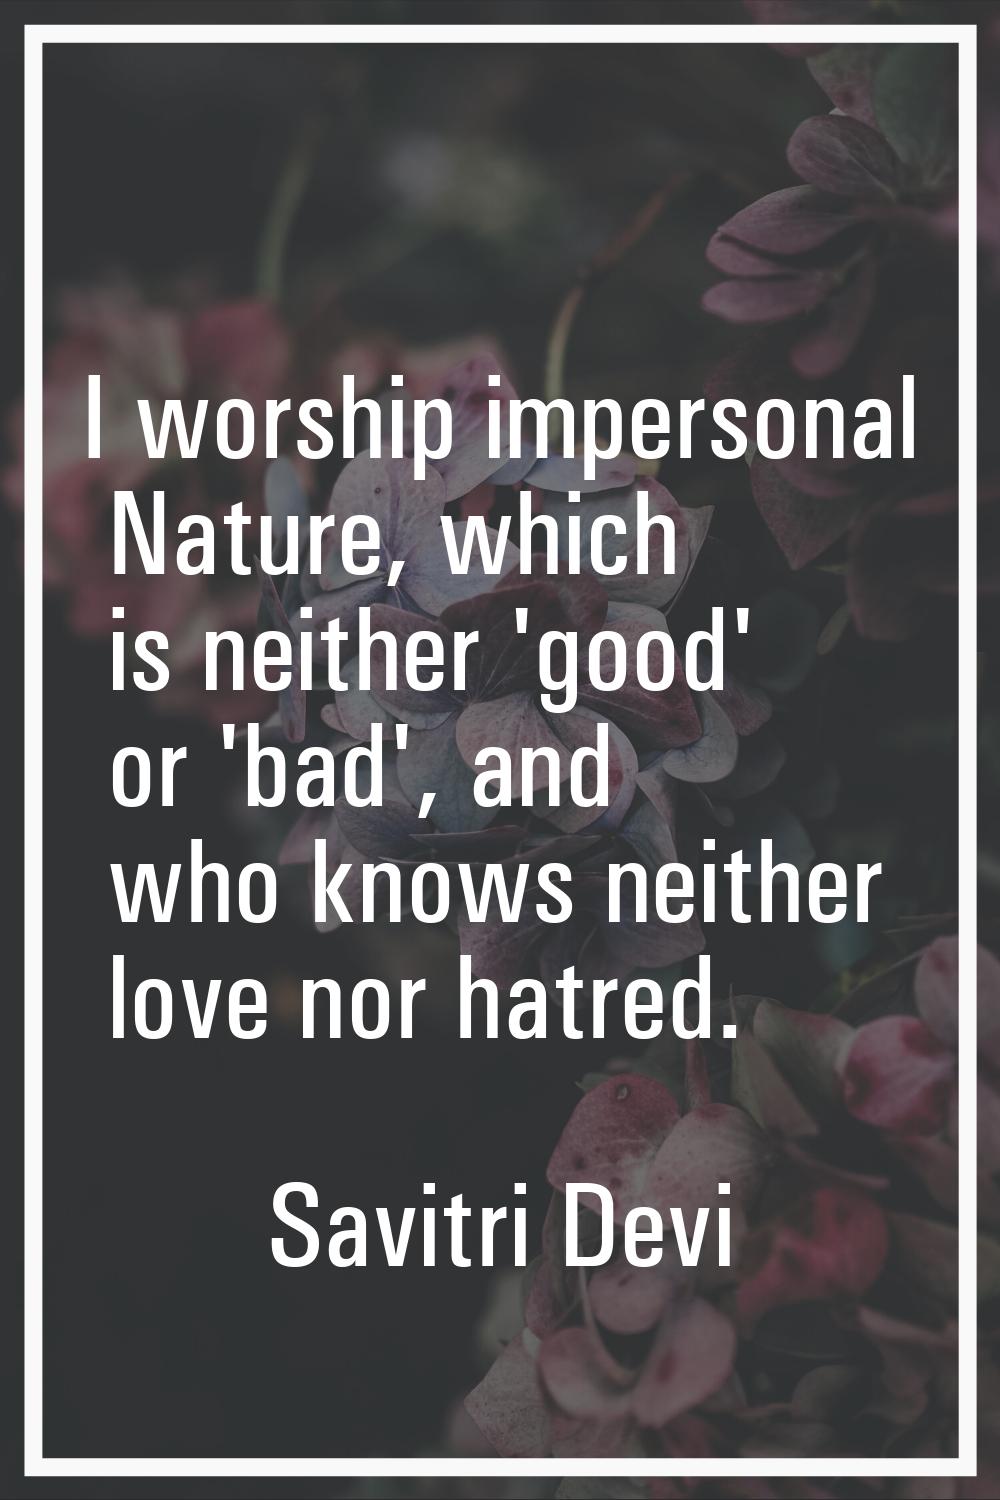 I worship impersonal Nature, which is neither 'good' or 'bad', and who knows neither love nor hatre